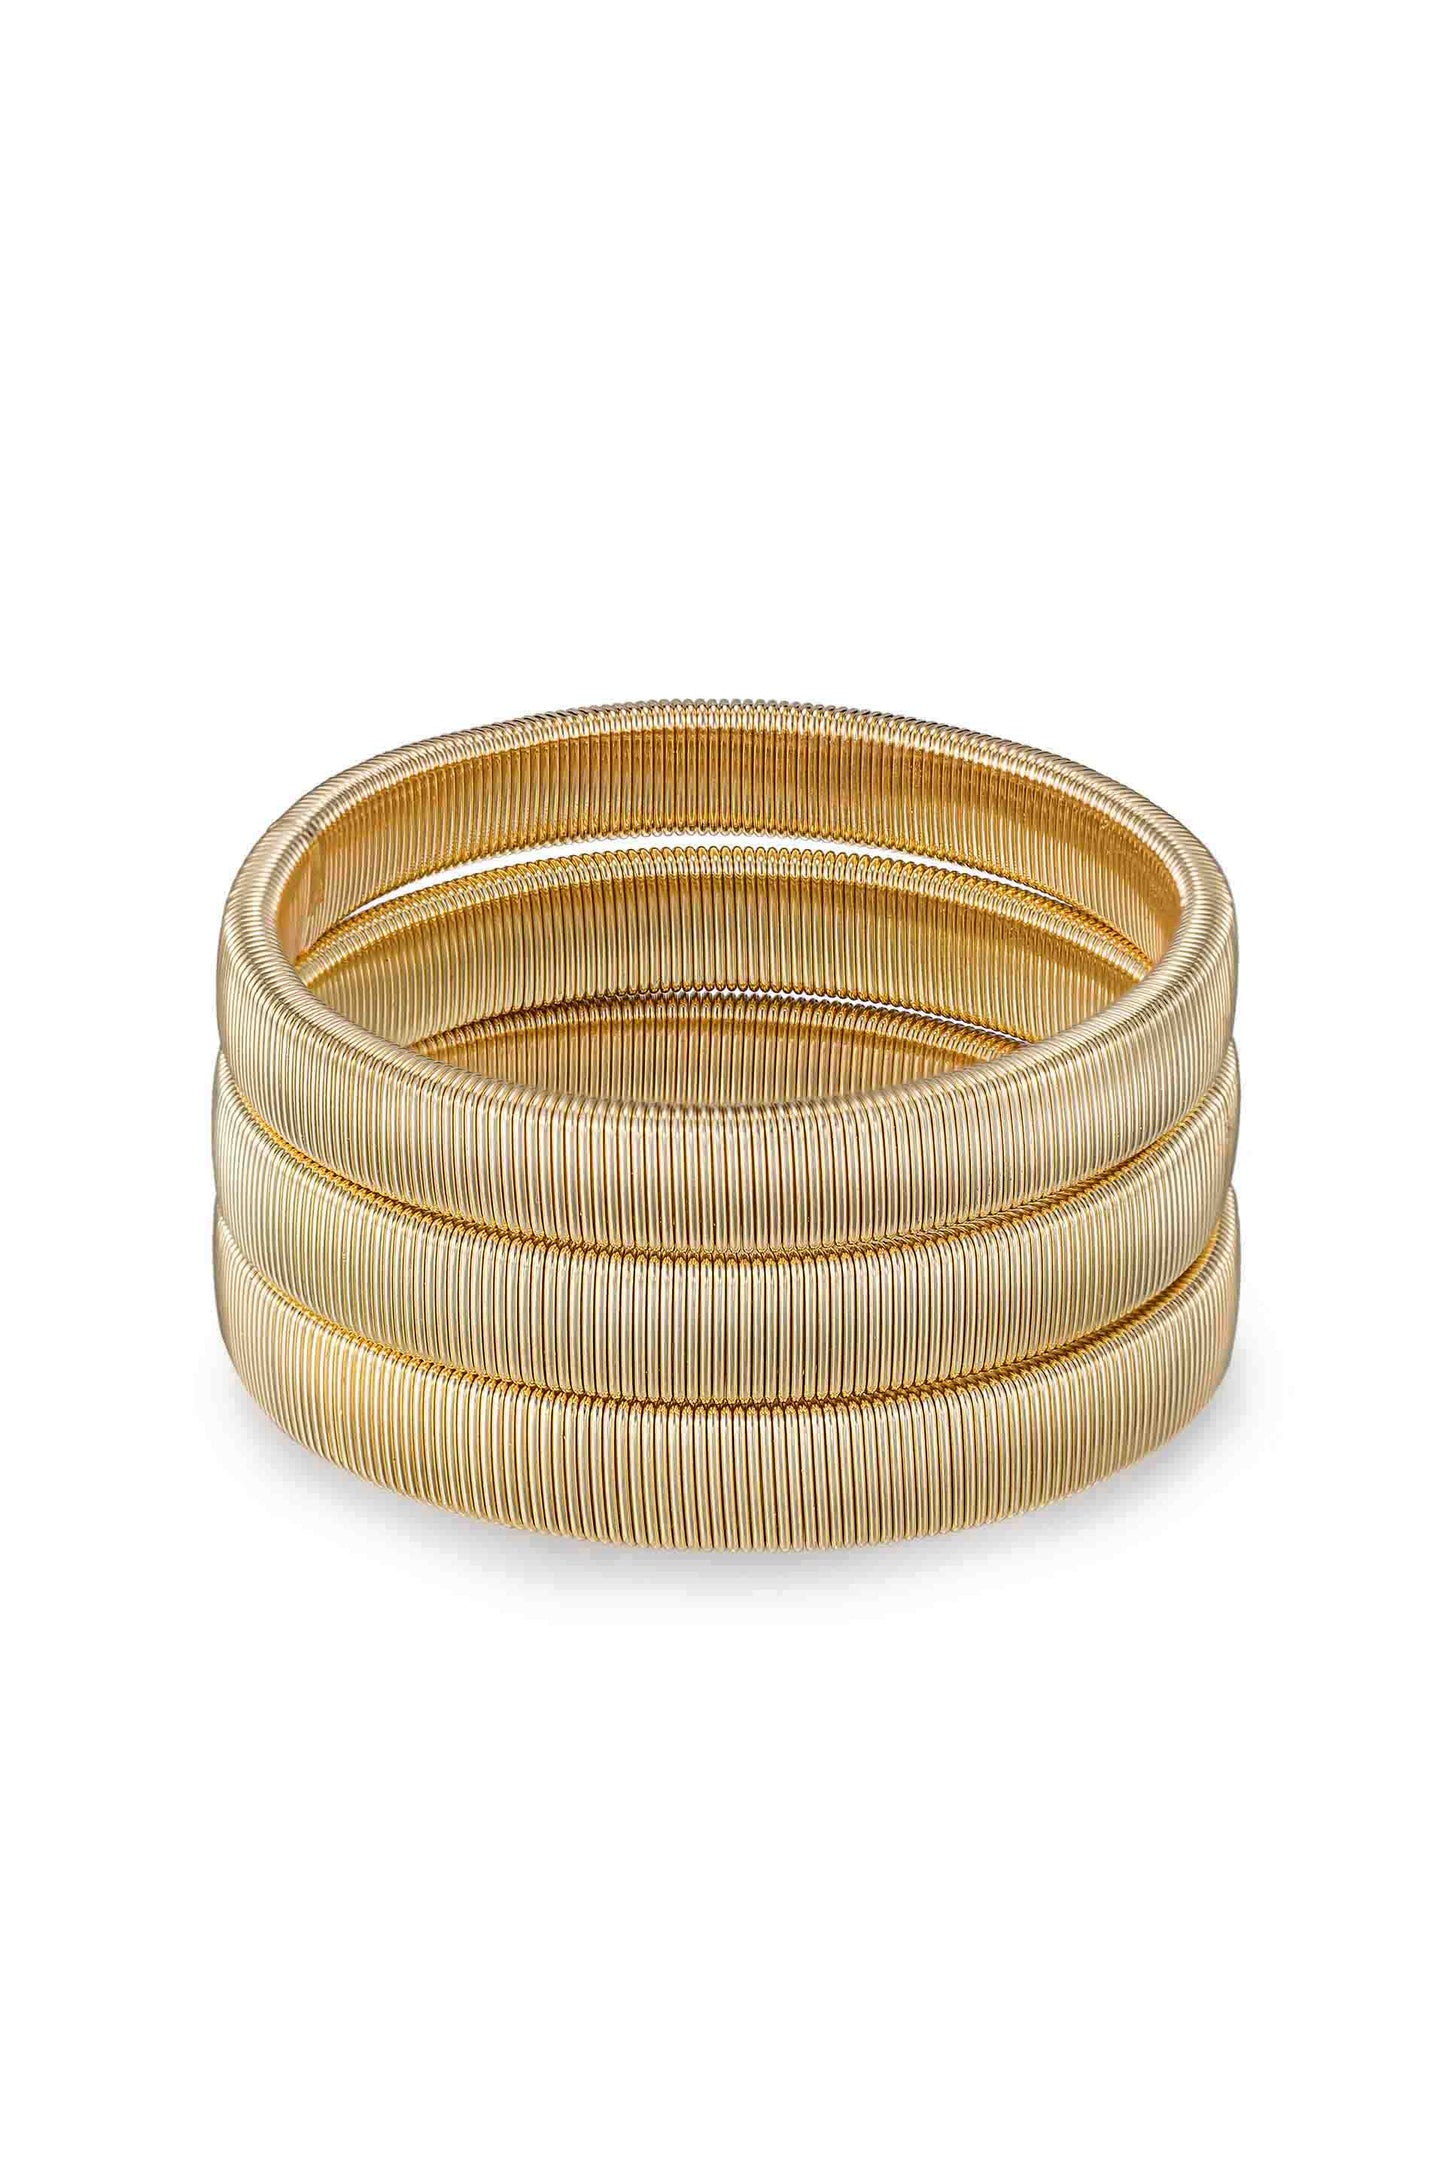 Your Essential Flex Snake Chain 18k Gold Plated Bangle Set